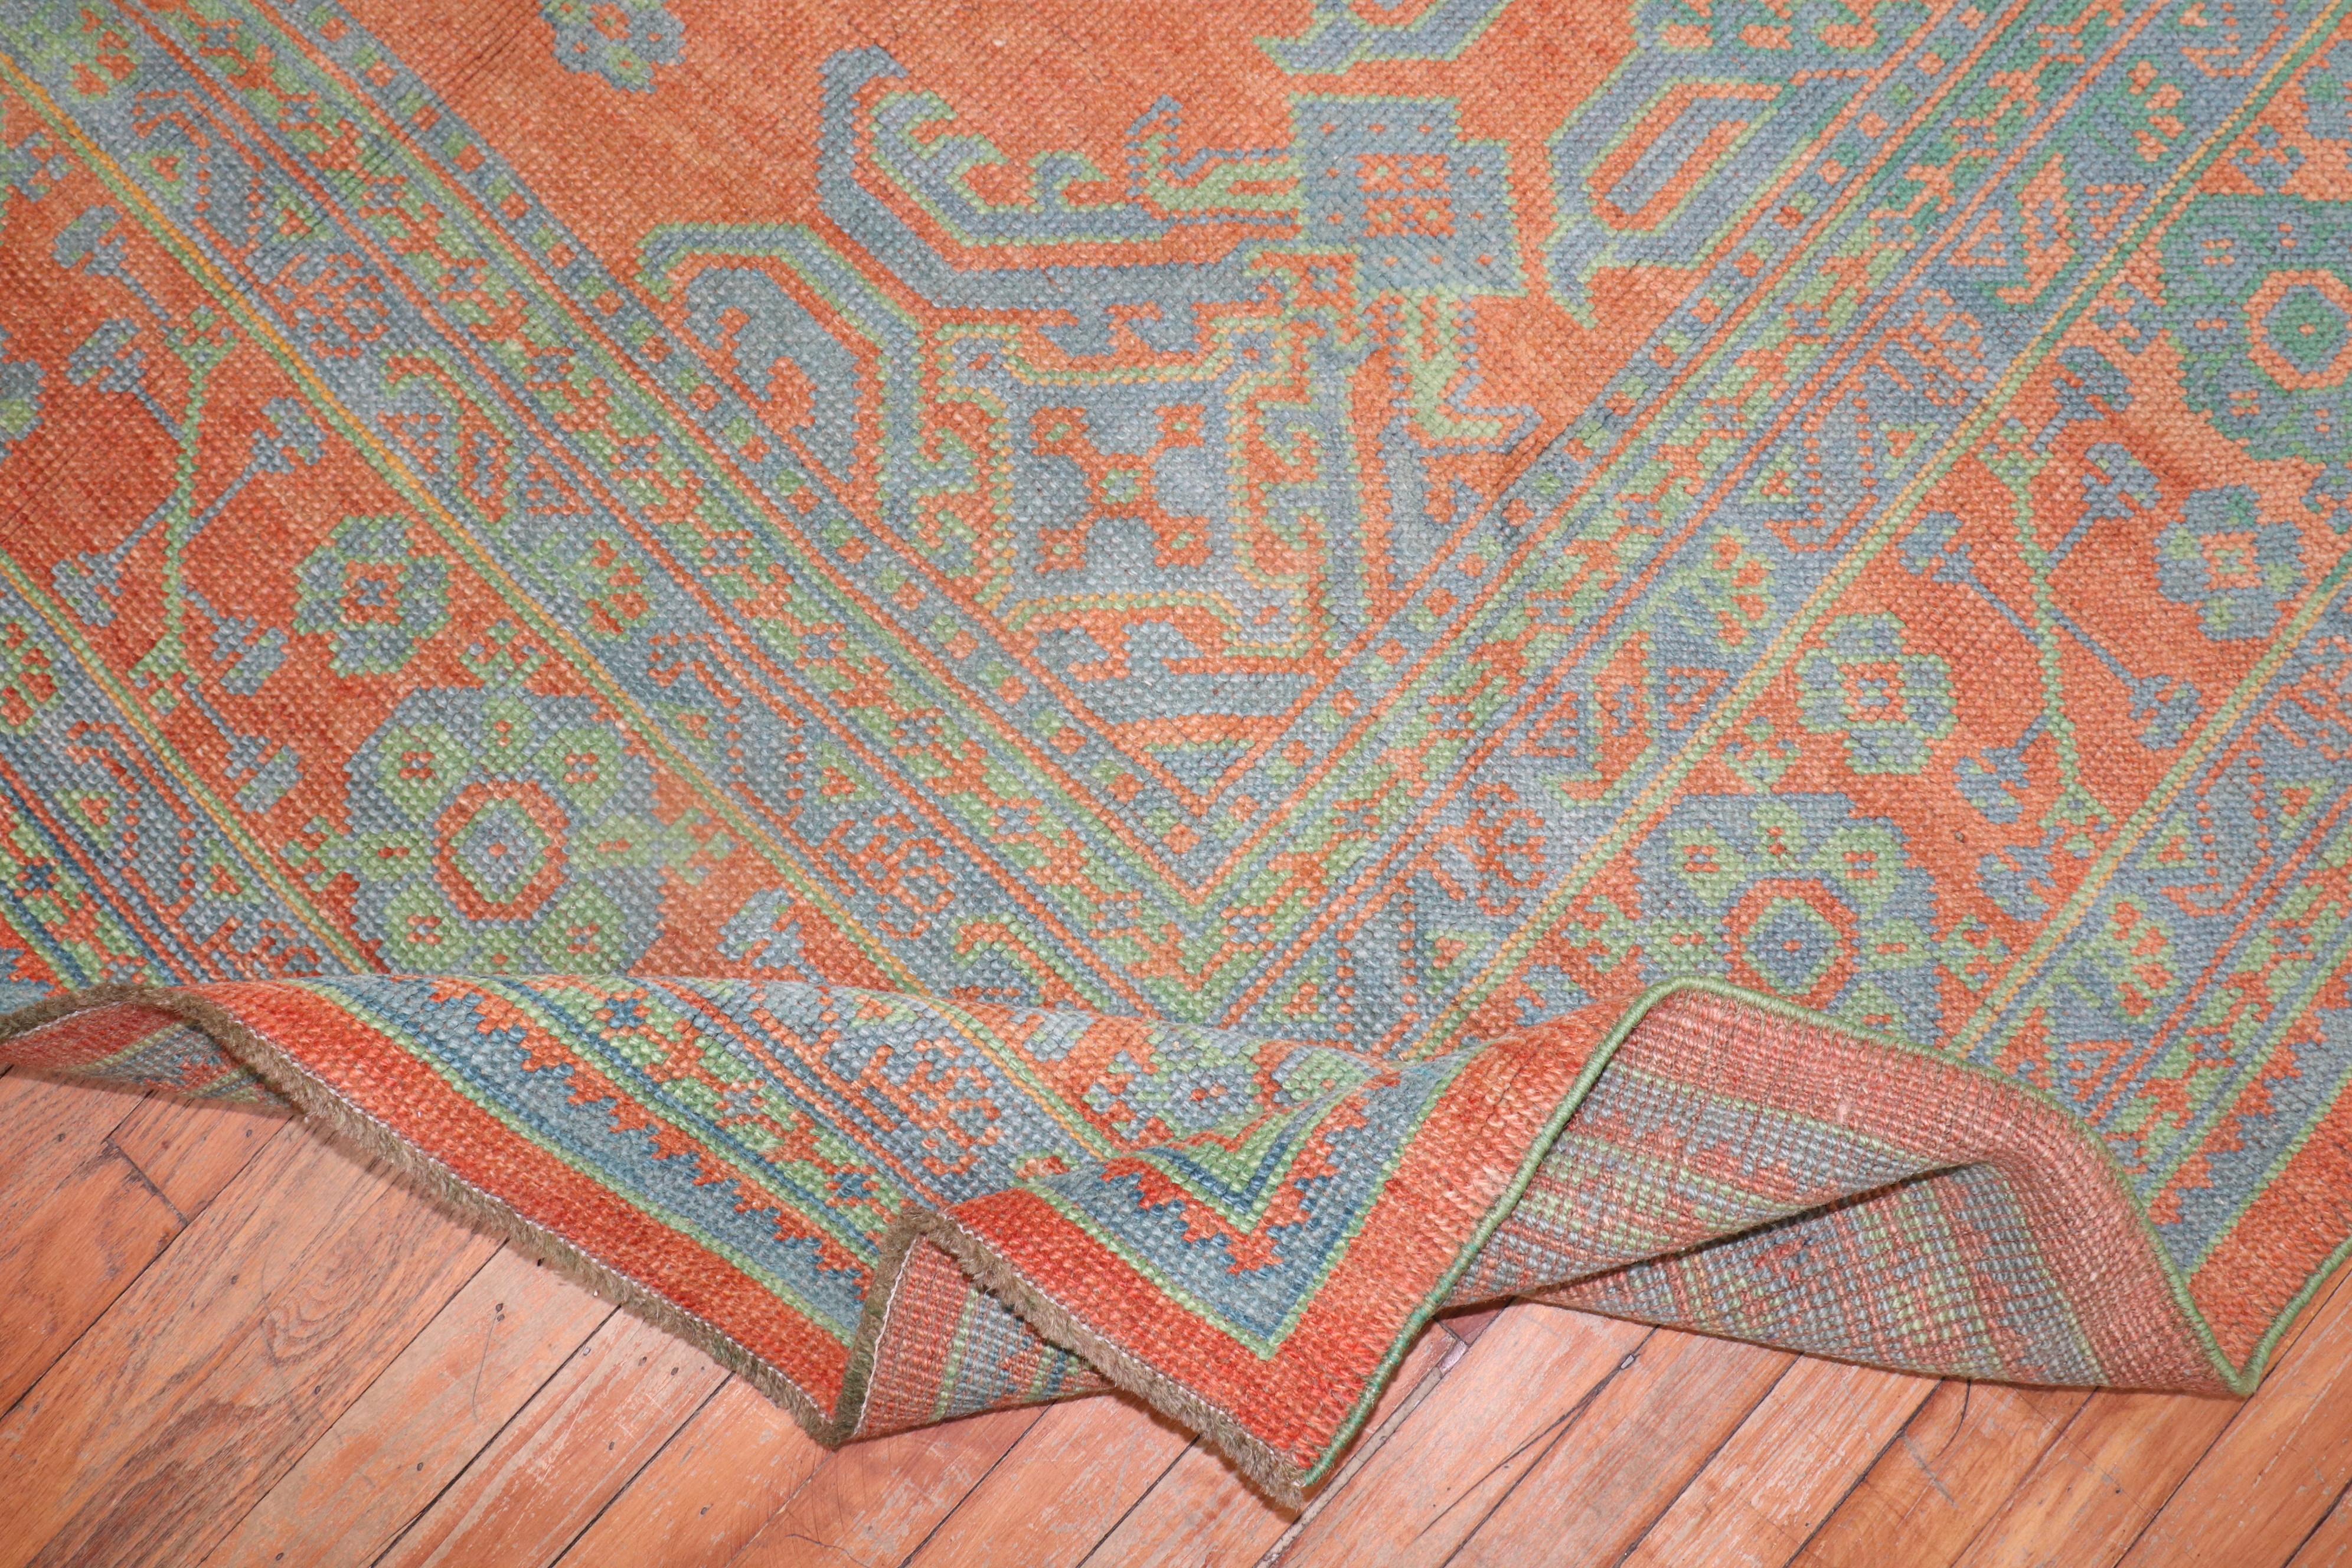 Bright coral antique Turkish Large Room size rug, circa 1920.

Measures: 11'4